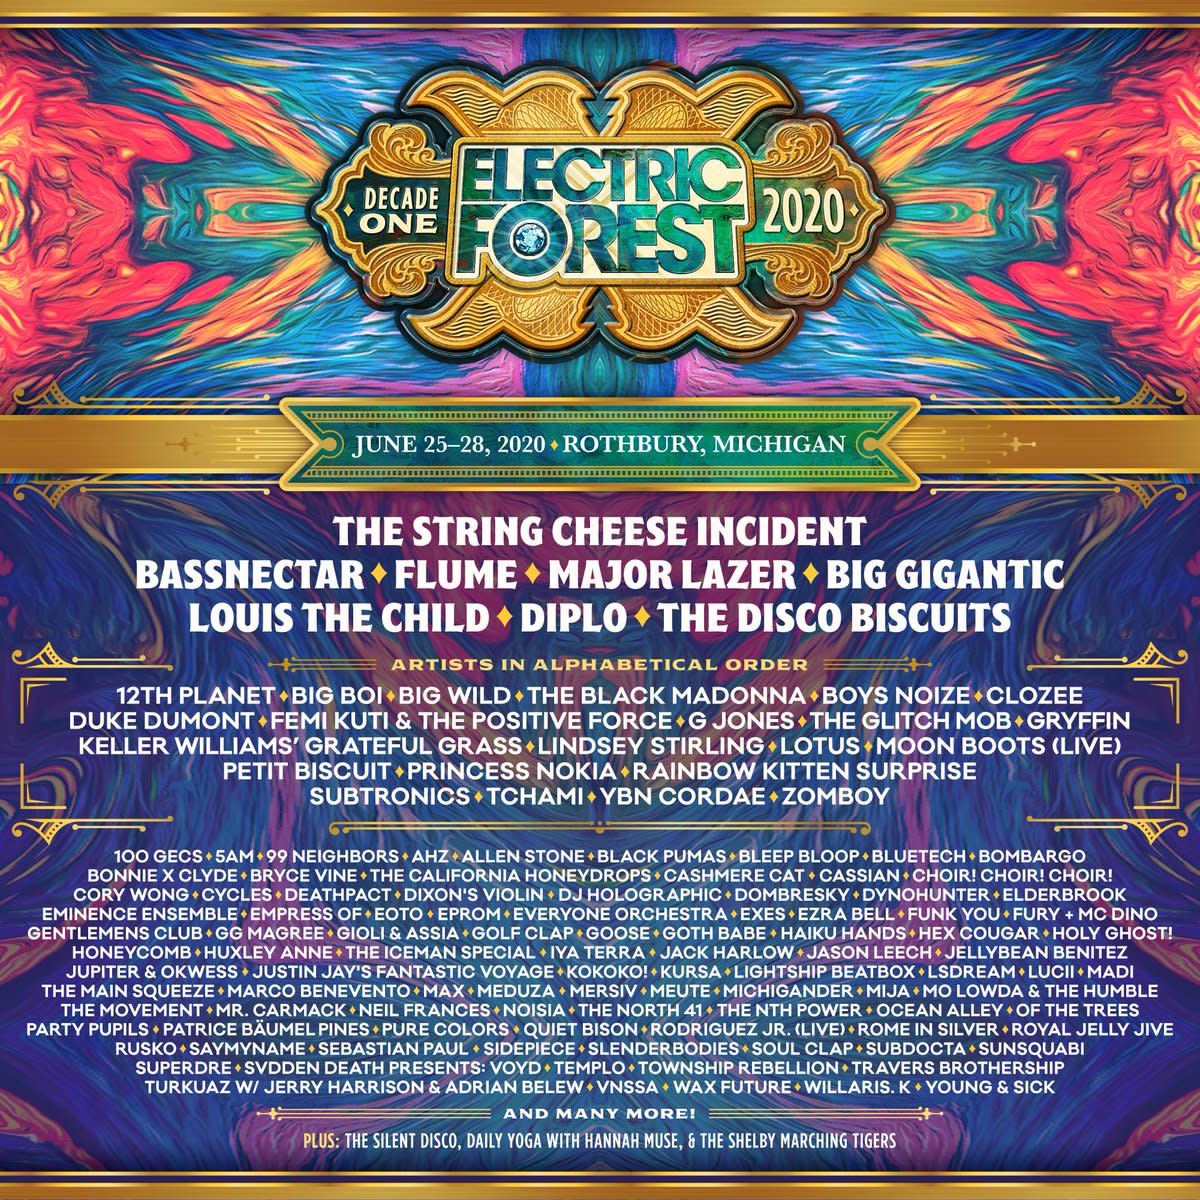 Bassnectar, Flume and Diplo Among Electric Forest 2020 Headliners EDM